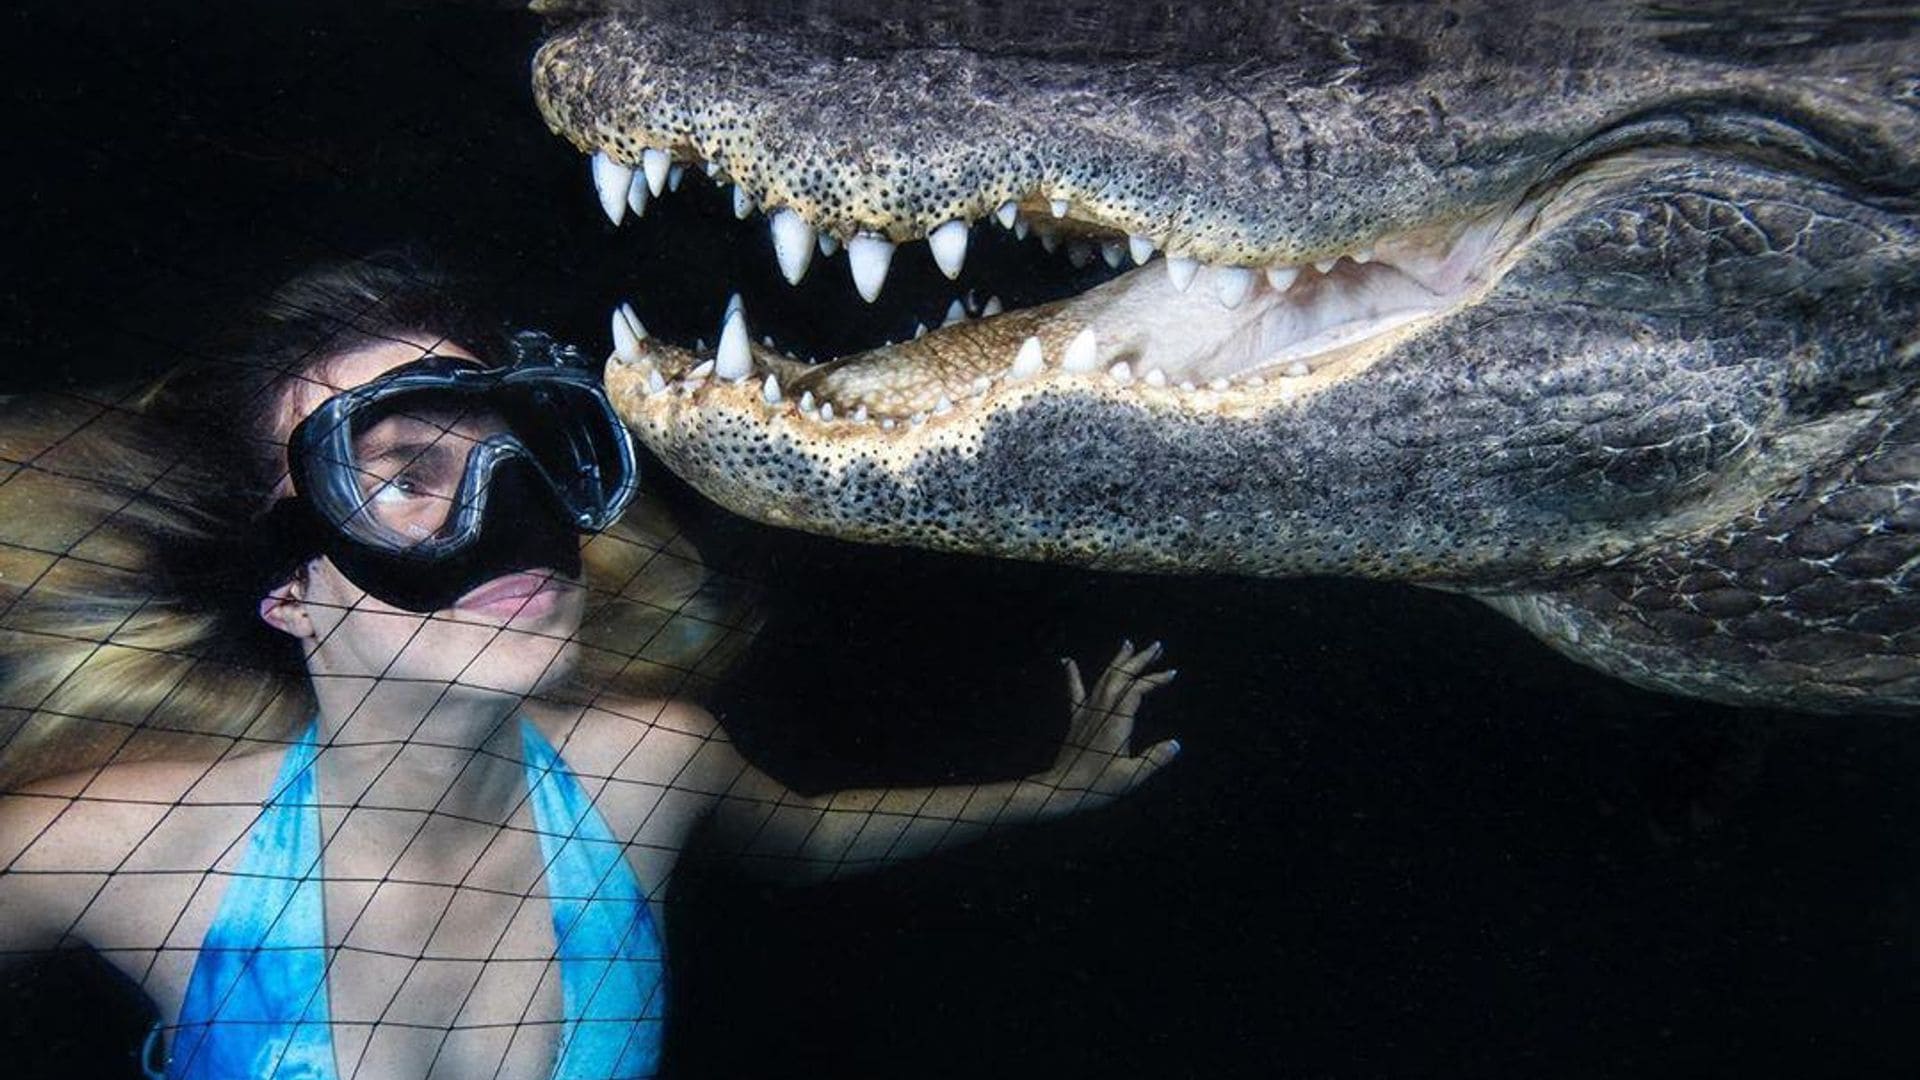 Lele Pons shares how swimming with alligators helps her mental health